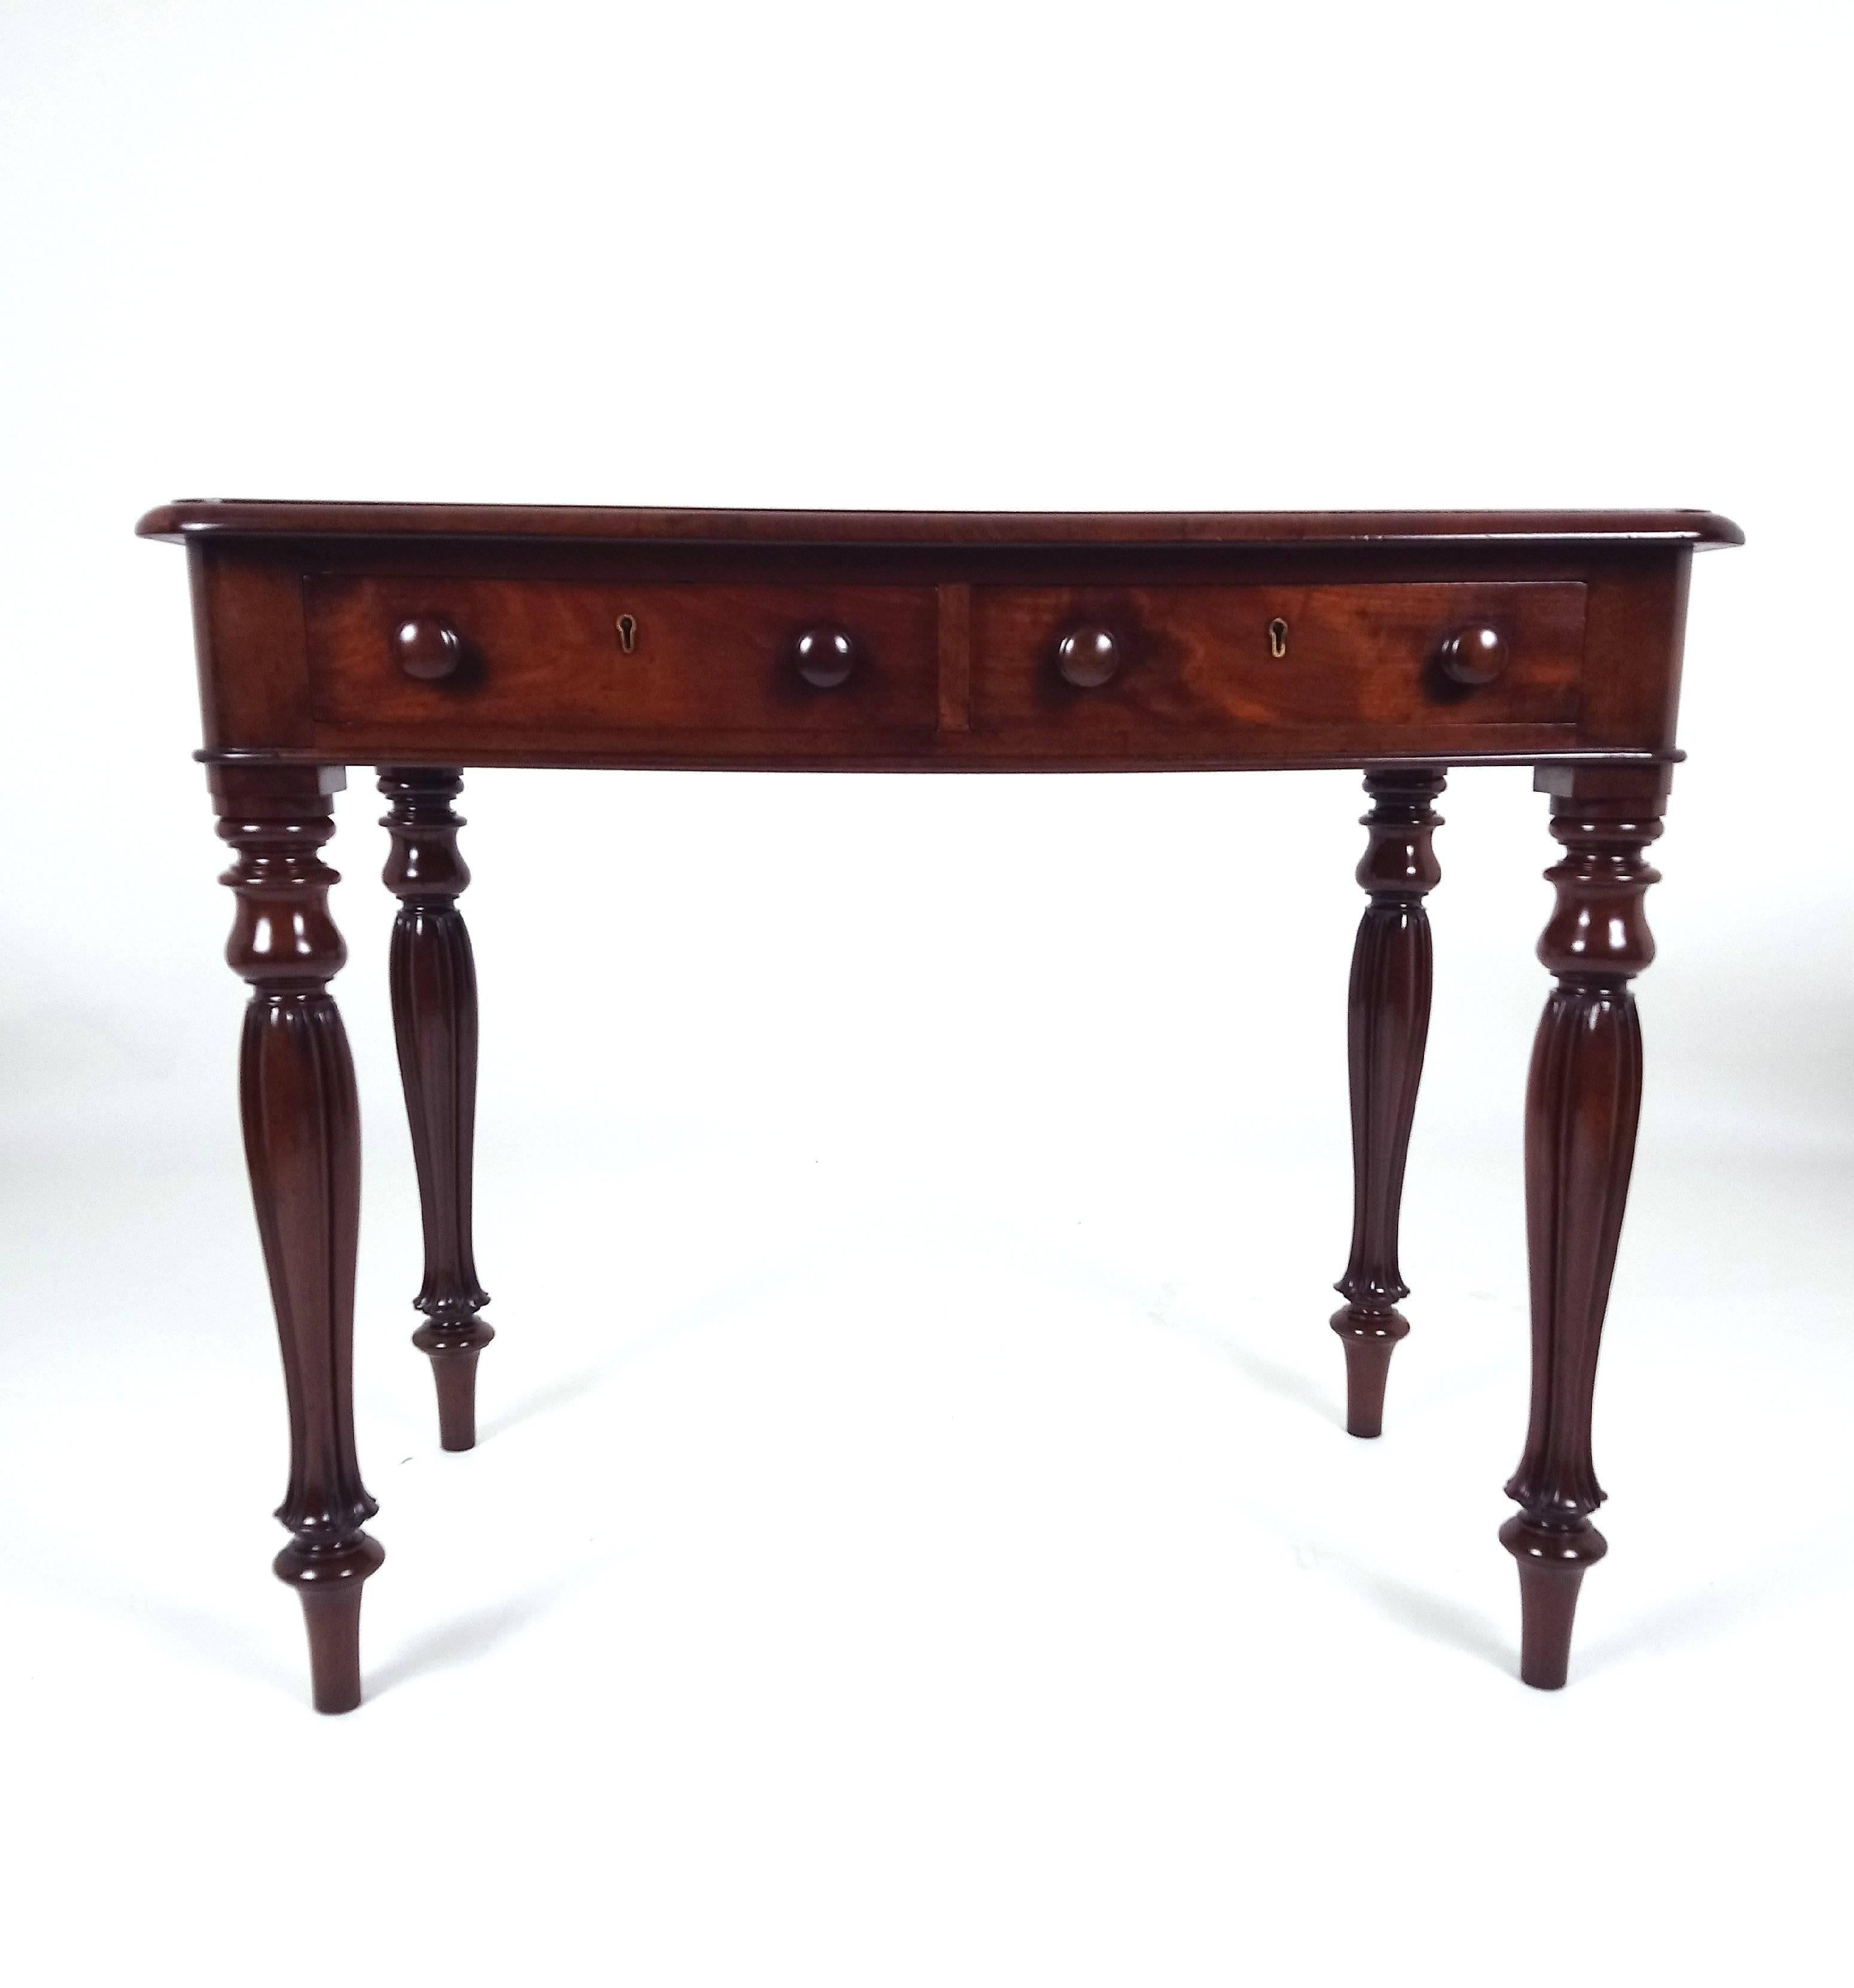 This very attractive and good quality early Victorian mahogany center table features two drawers showing on each side, with two working drawers and two false drawers. The table stands on slender melon turned supports and has a rich, deep color. It